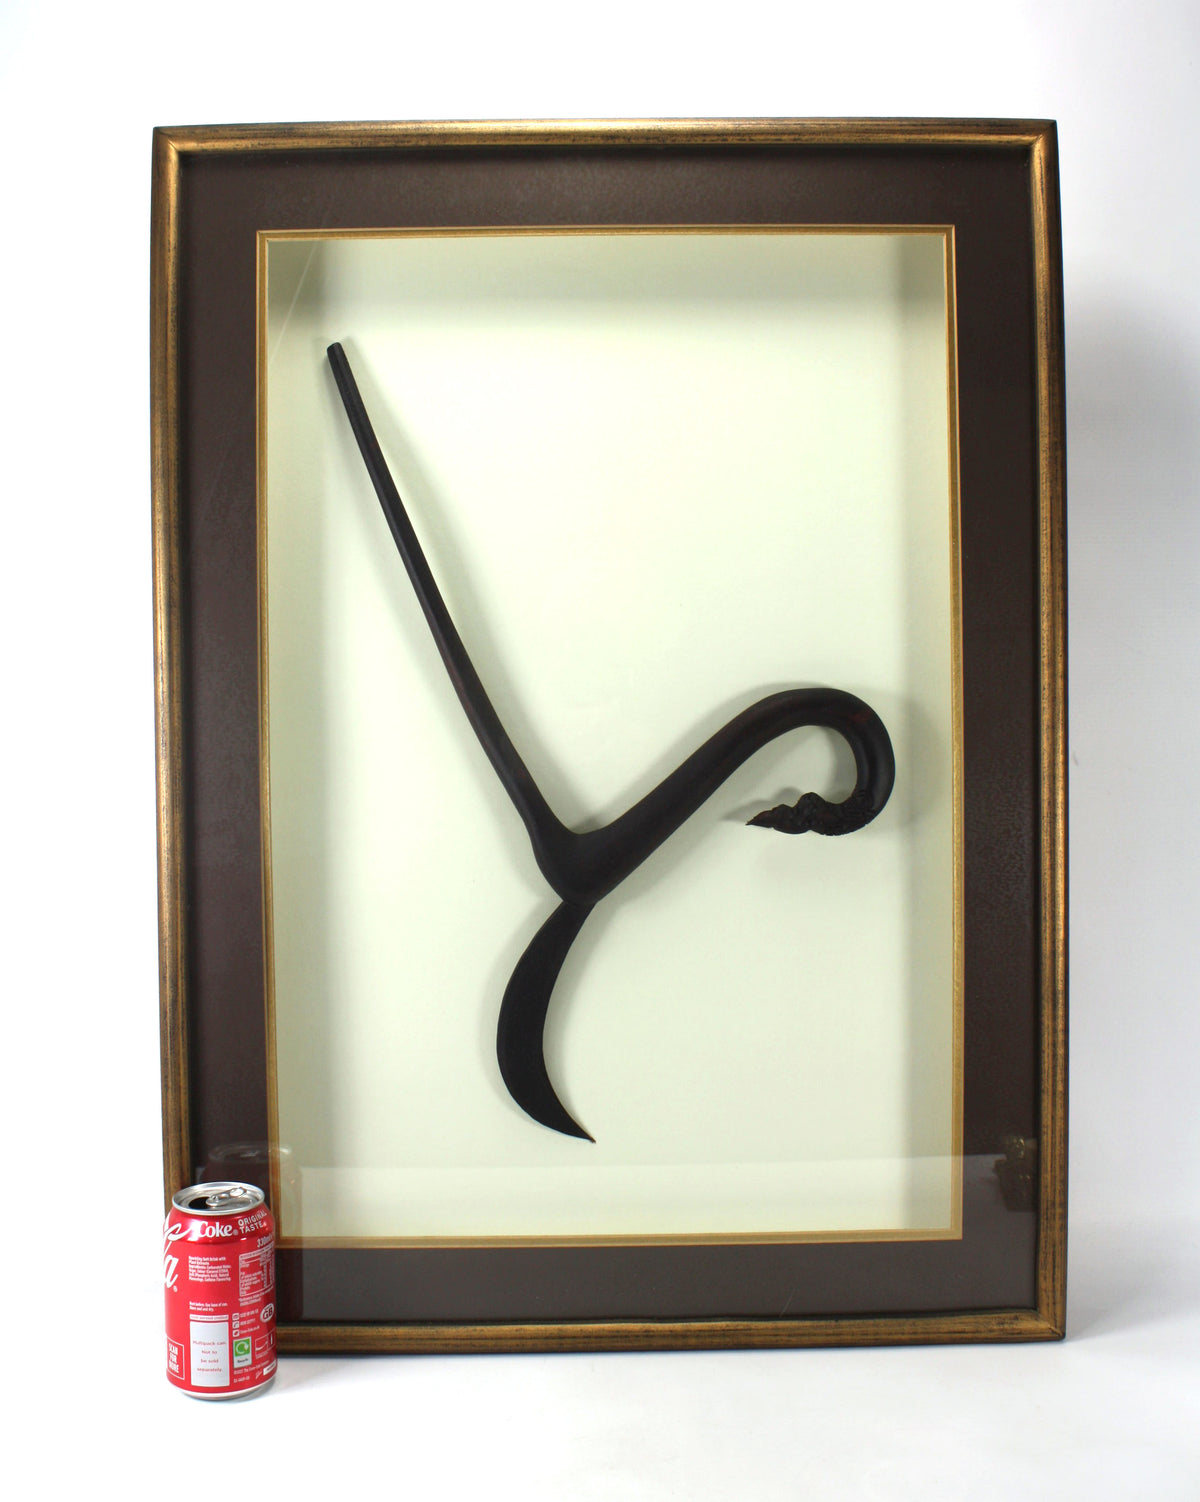 Cambodian Rice Sickle, Framed Display, 76cm x 56cm. Pair available.